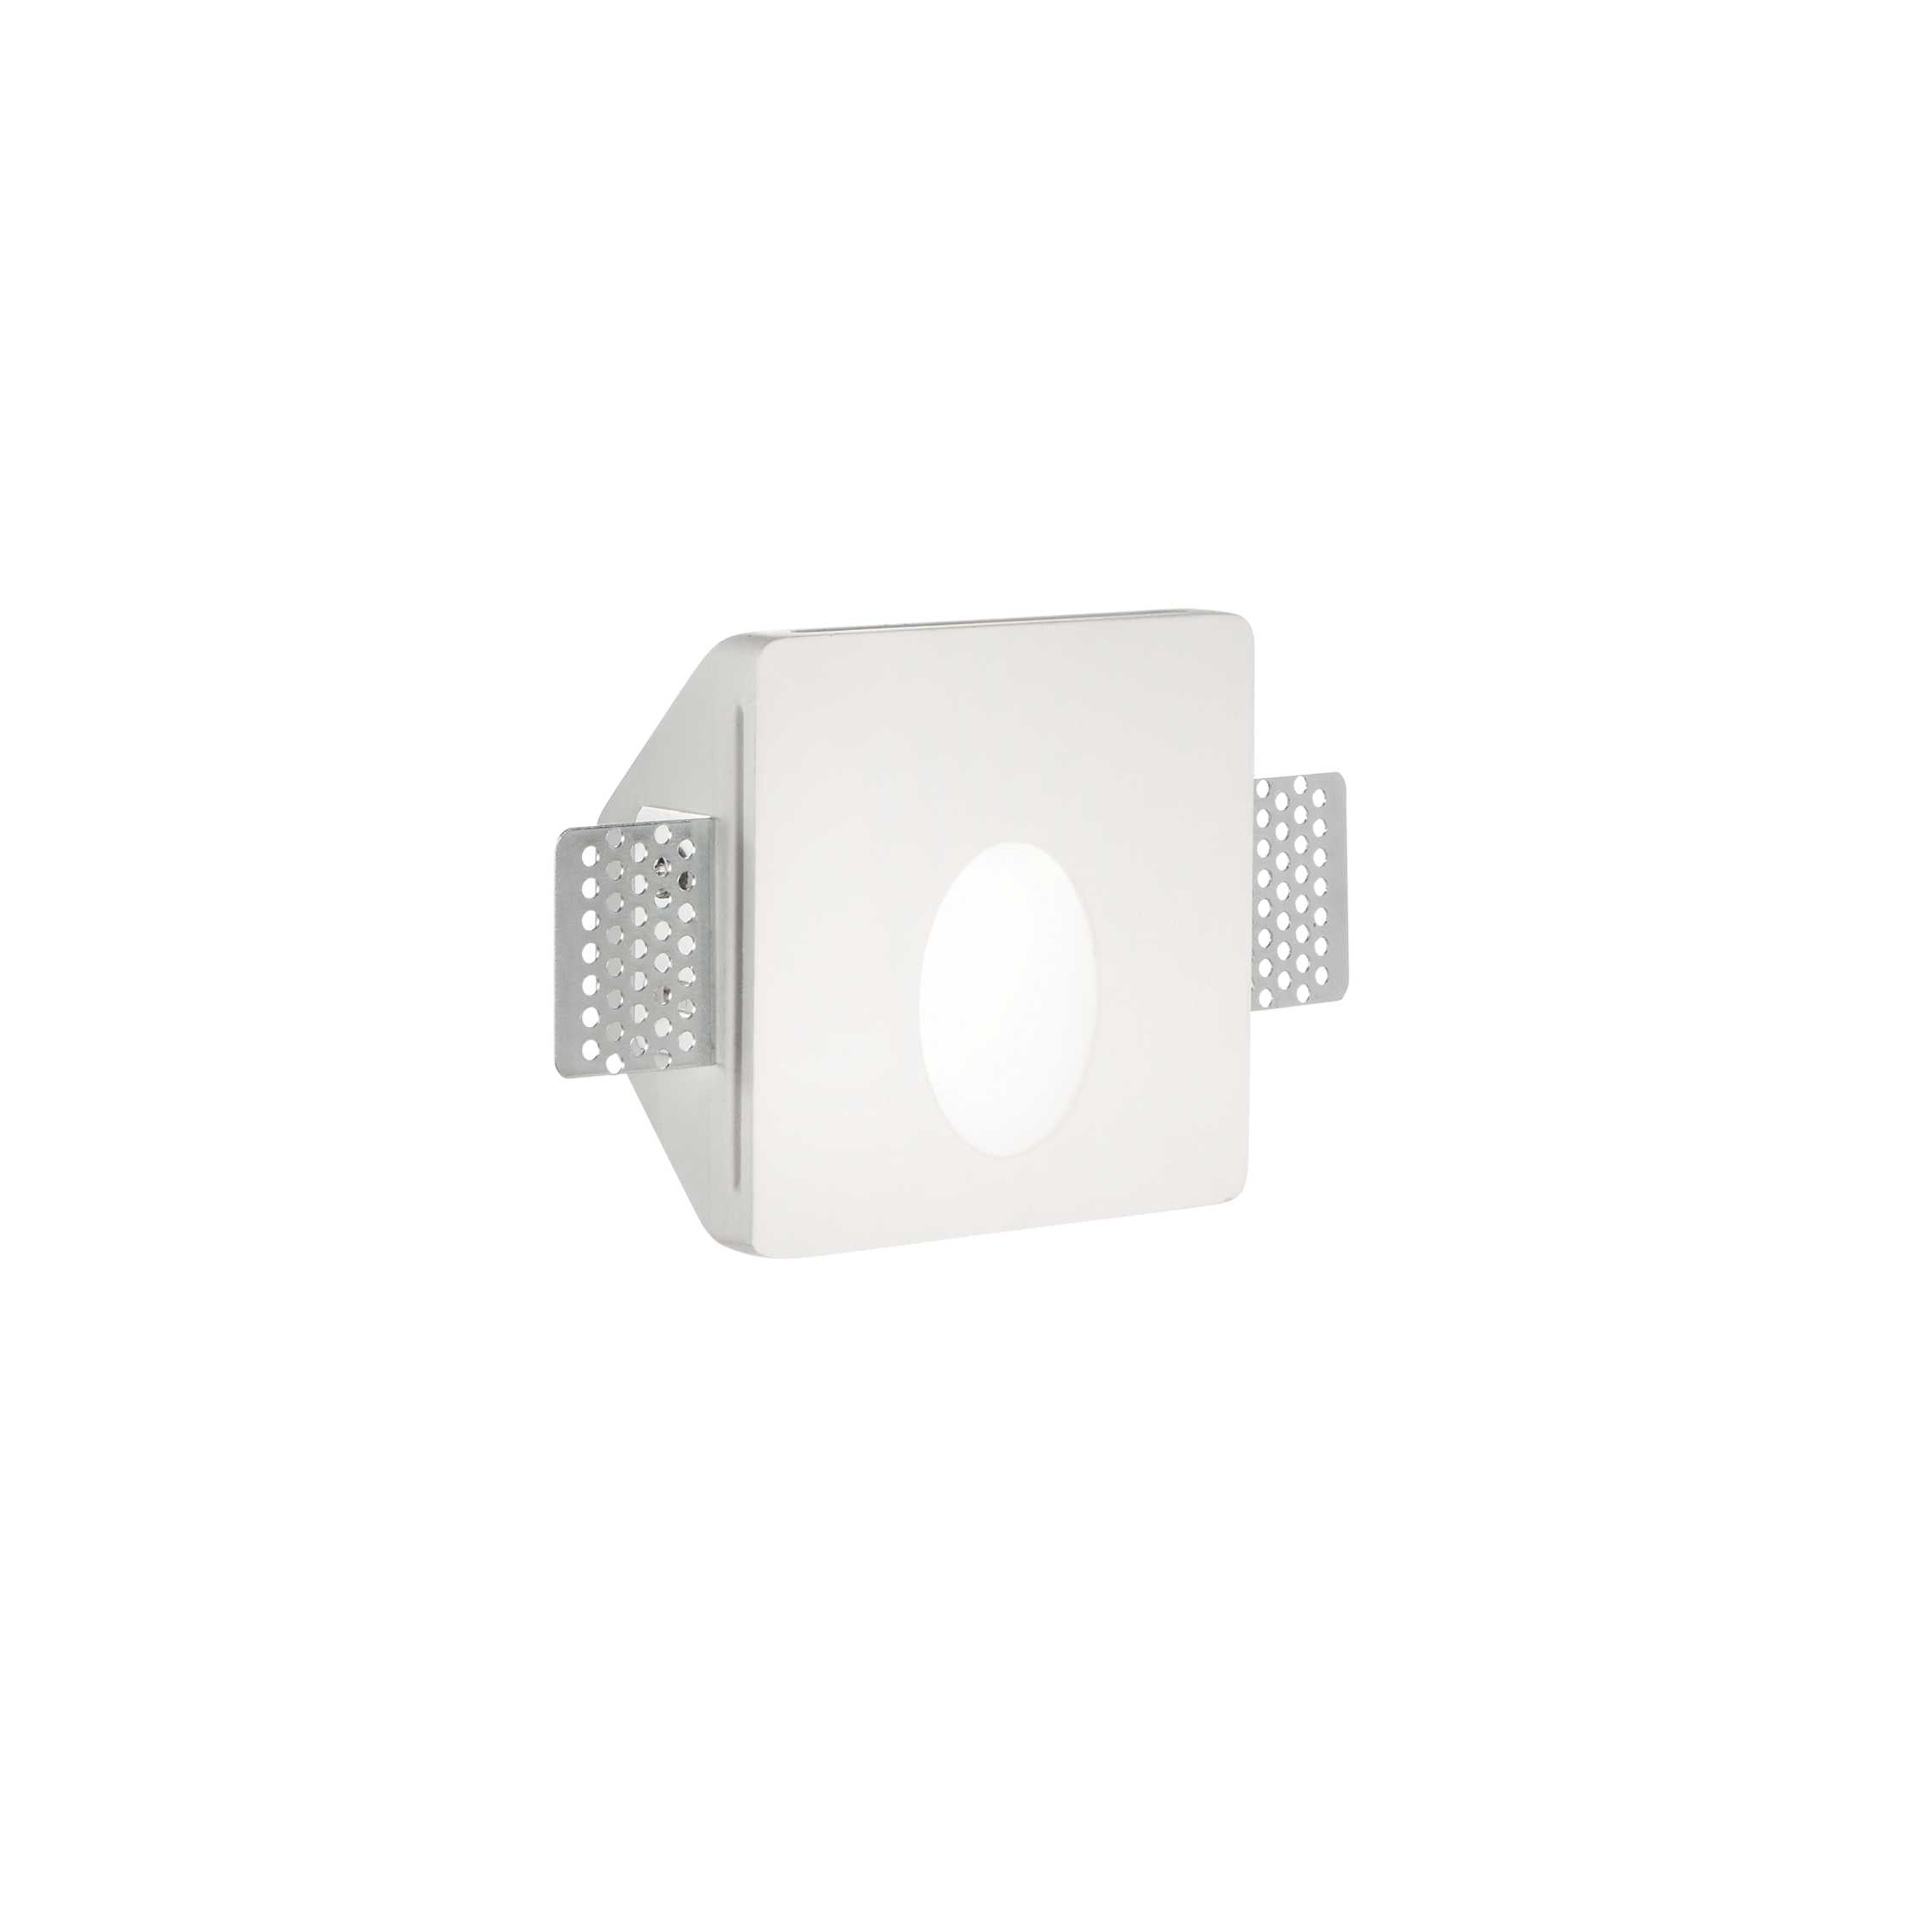 Walky Recessed Wall Light - White Finish - Cusack Lighting